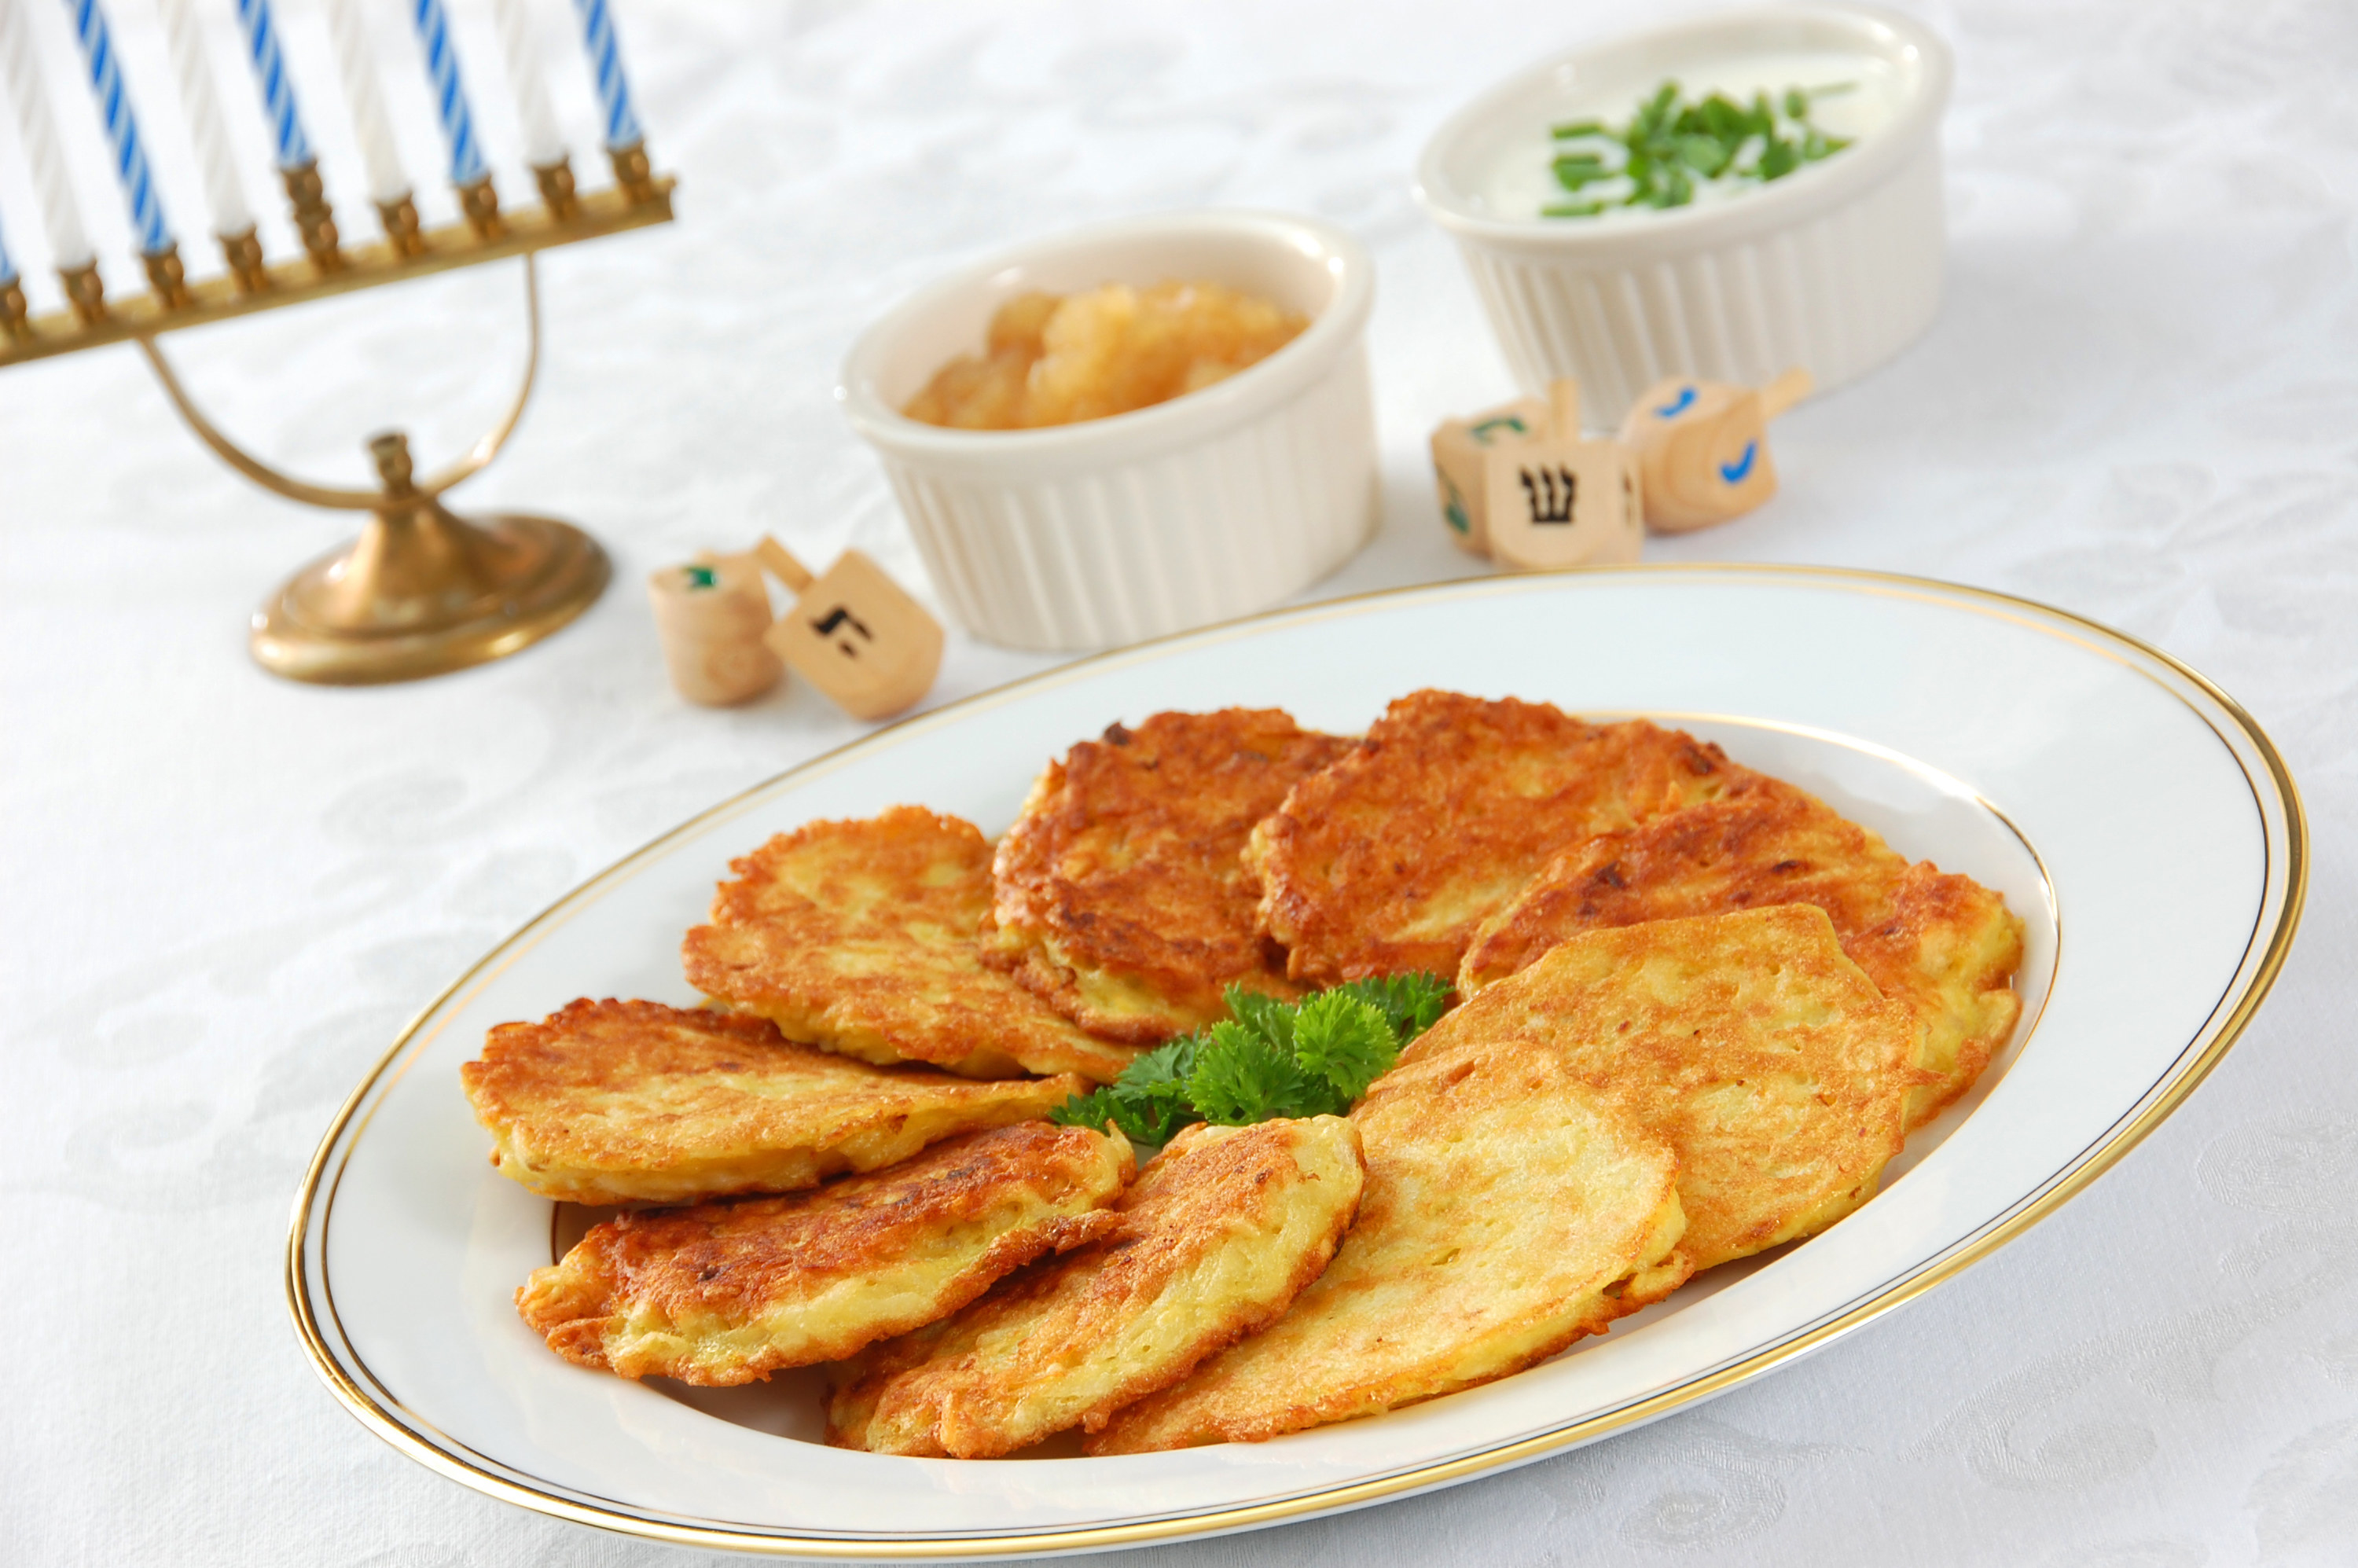 A table set for Hanukkah, with dreidels, menorah, and a plate of crispy latkes (potato pancakes) served with apple sauce and sour cream